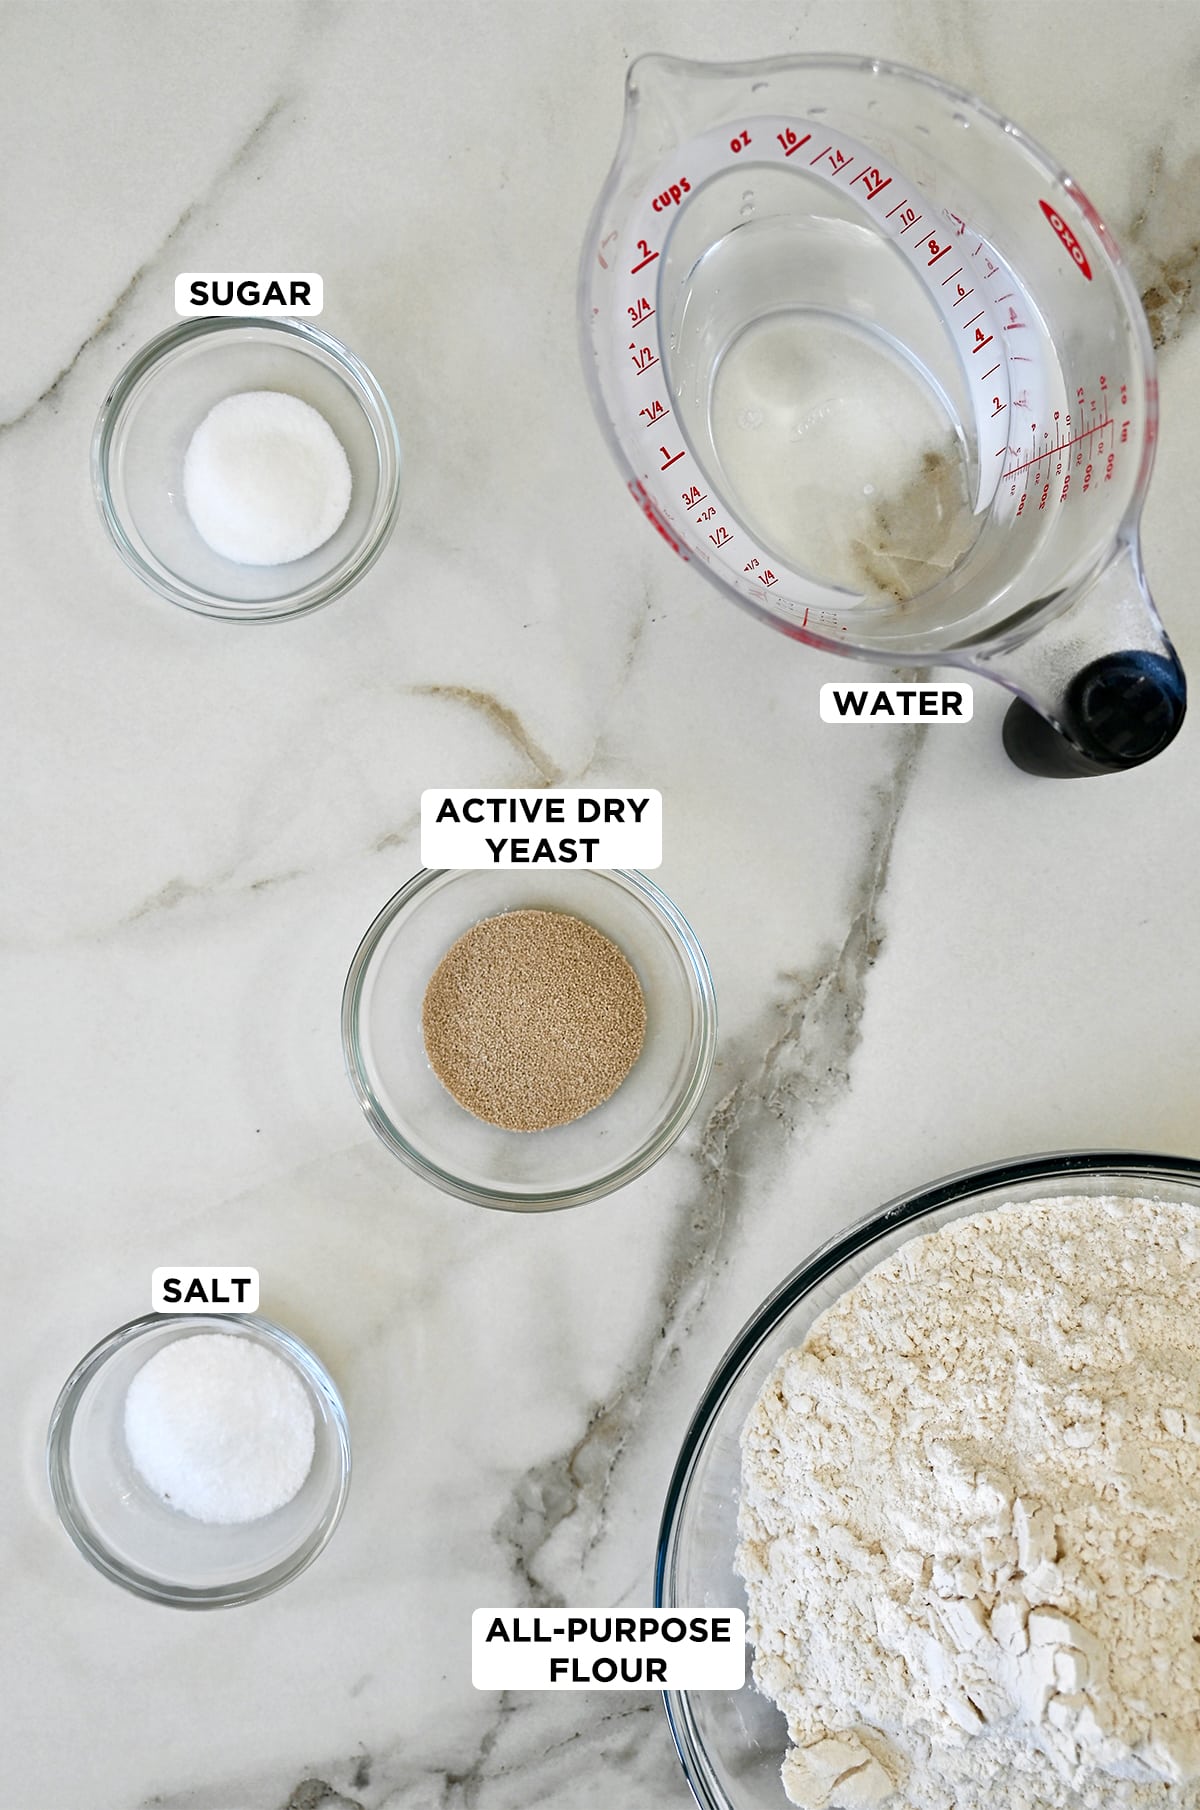 Glass bowls containing sugar, active dry yeast, salt and all-purpose flour next to a liquid measuring cup filled with water.